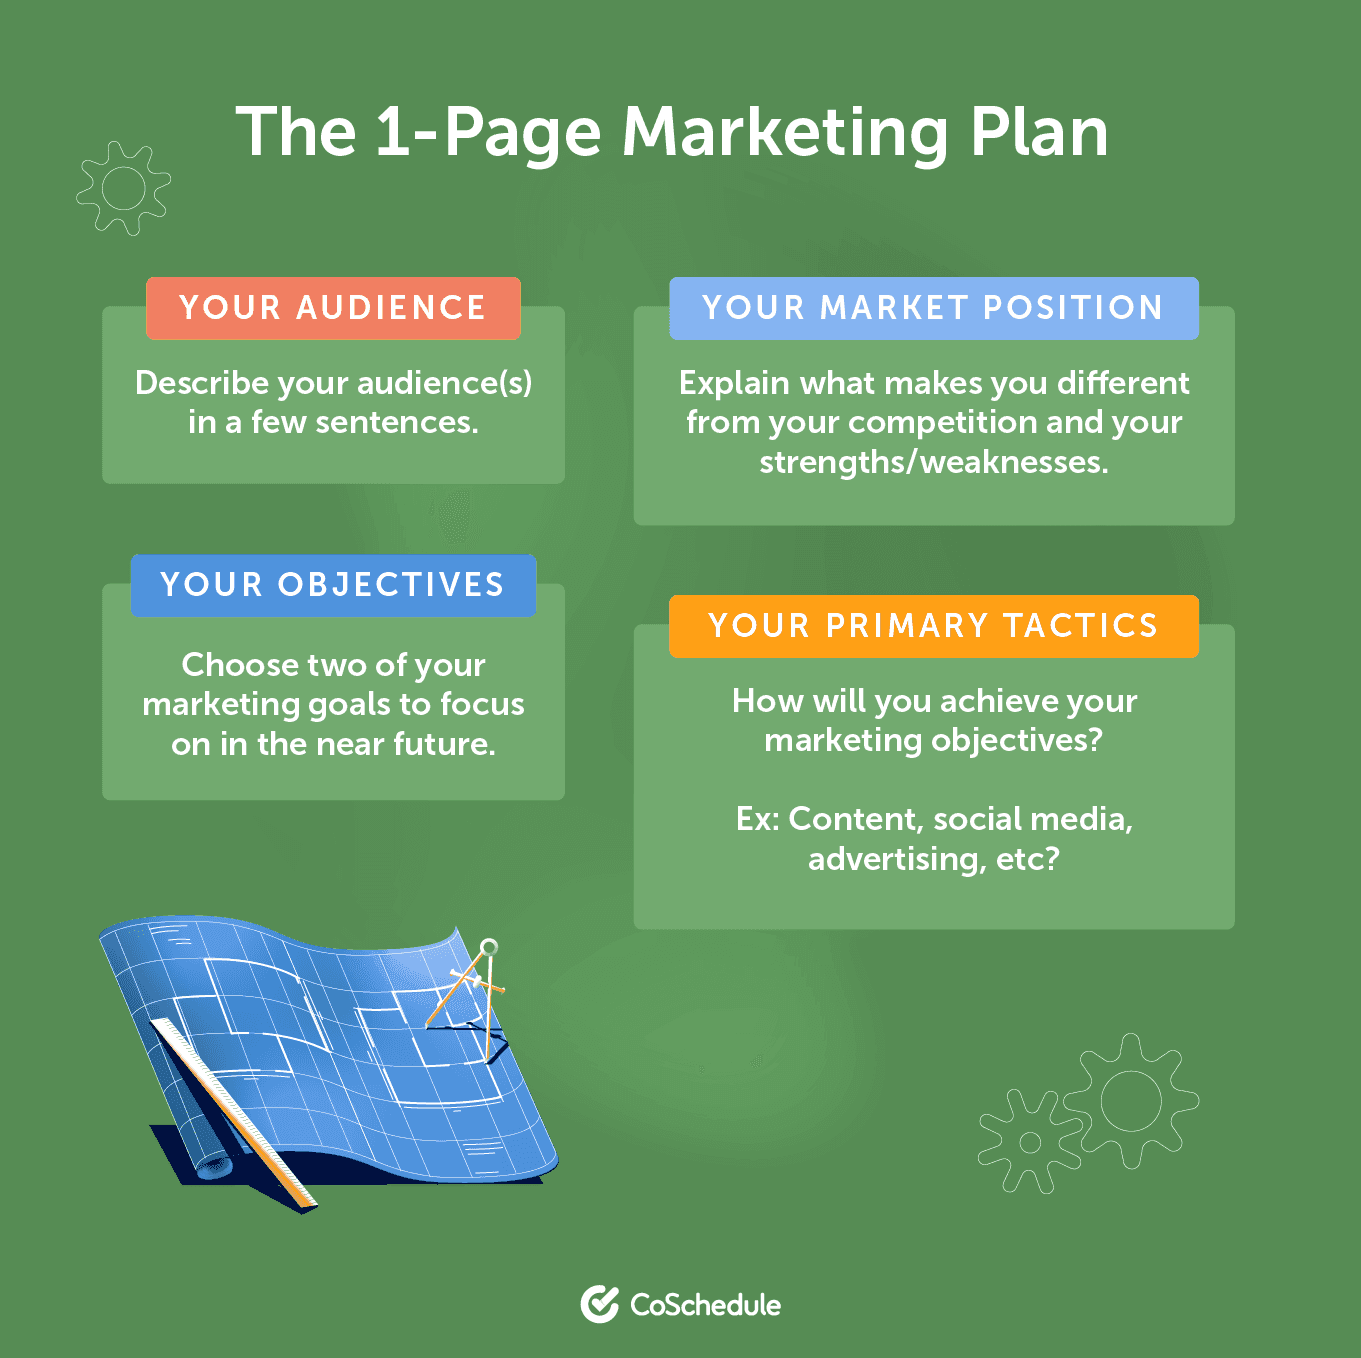 The 1 page marketing plan including your audience, your objectives, your market position, and your primary tactics, presented by coschedule.